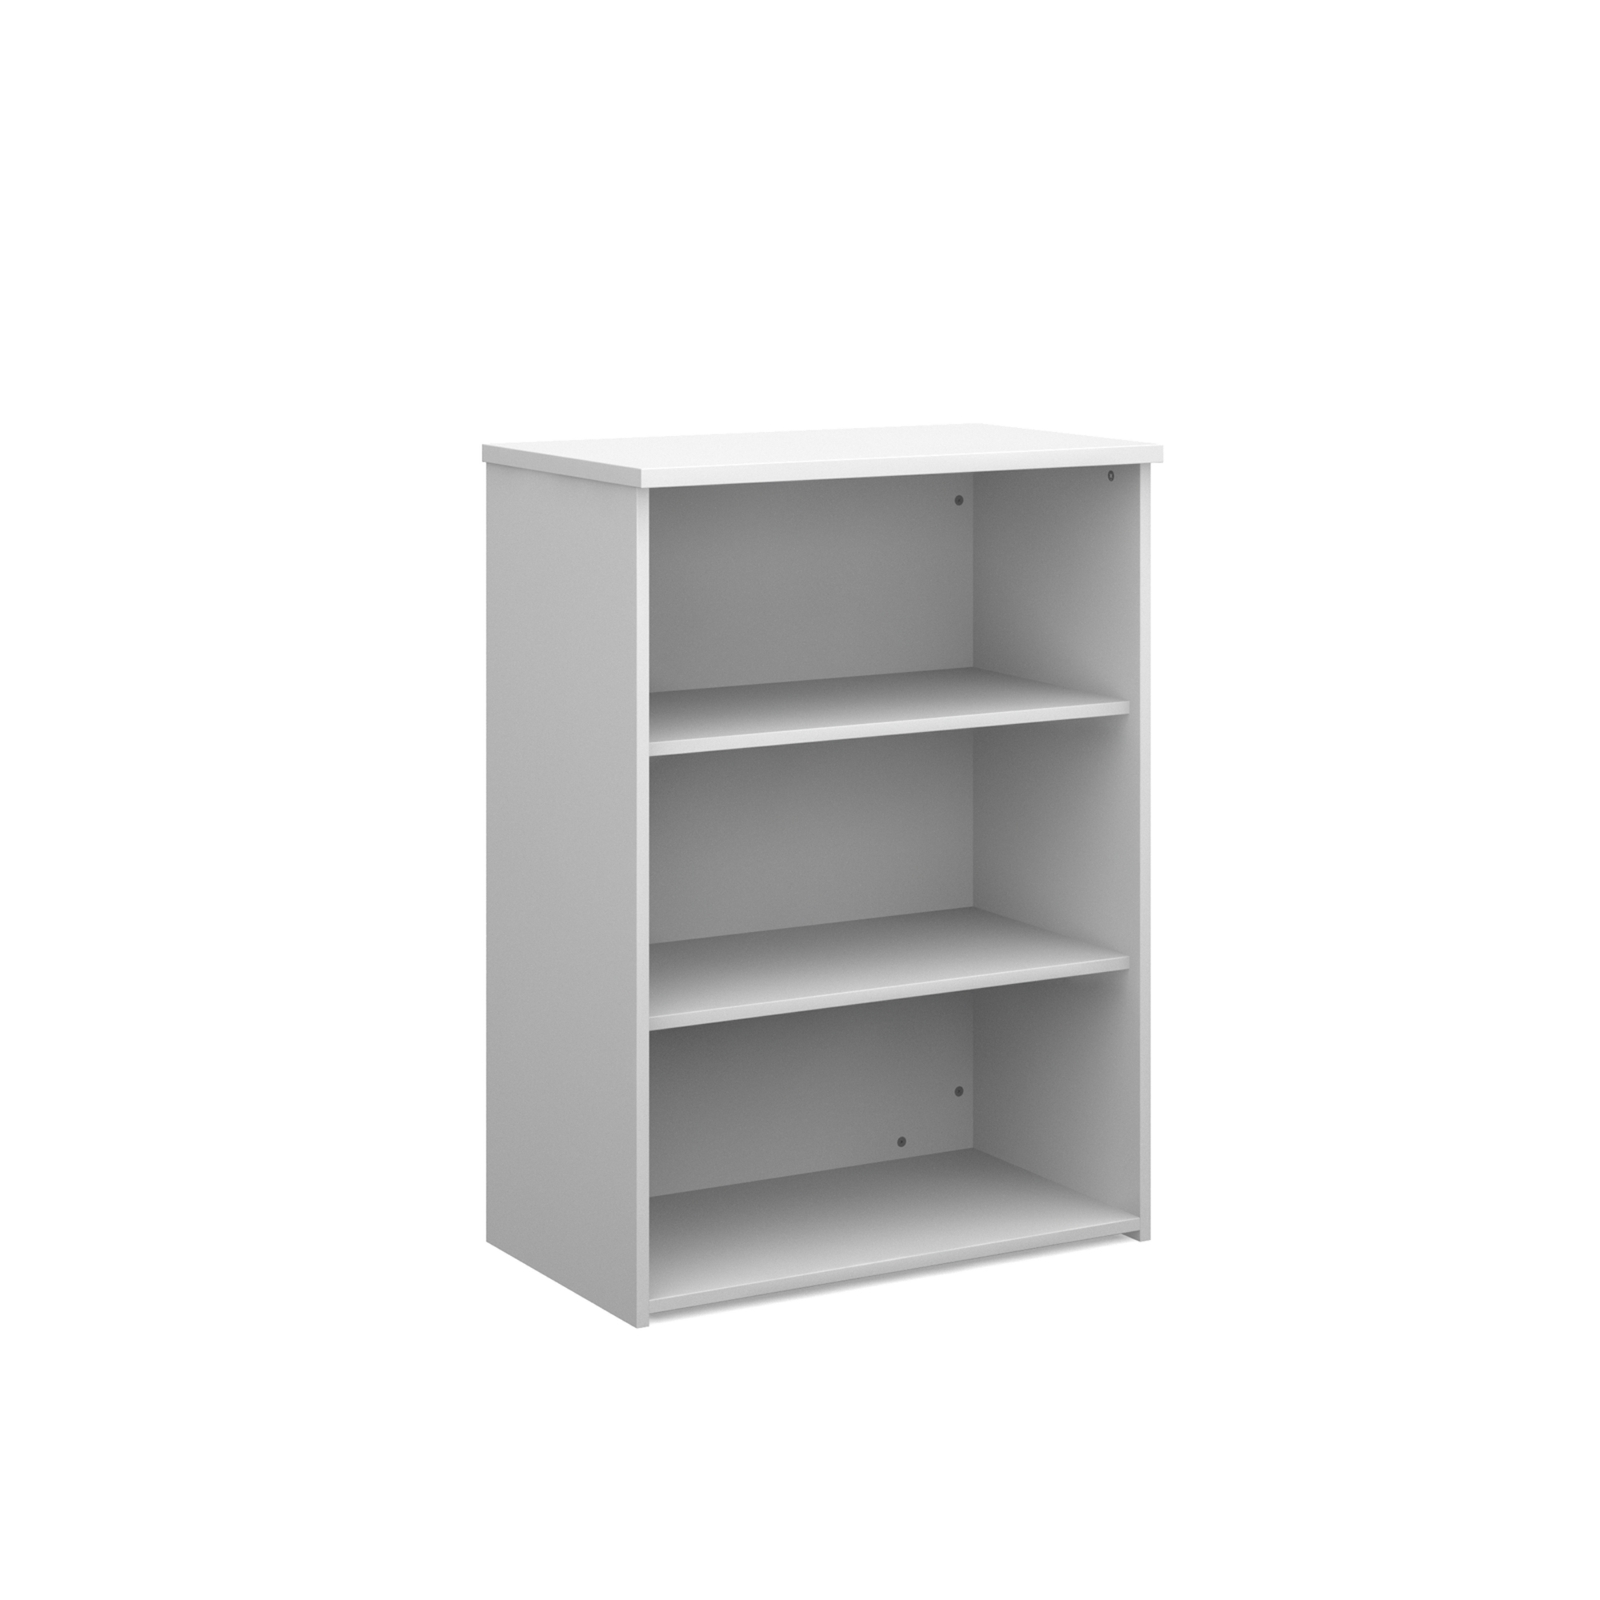 Classmates Wooden Bookcases - White - 1000mm - Each